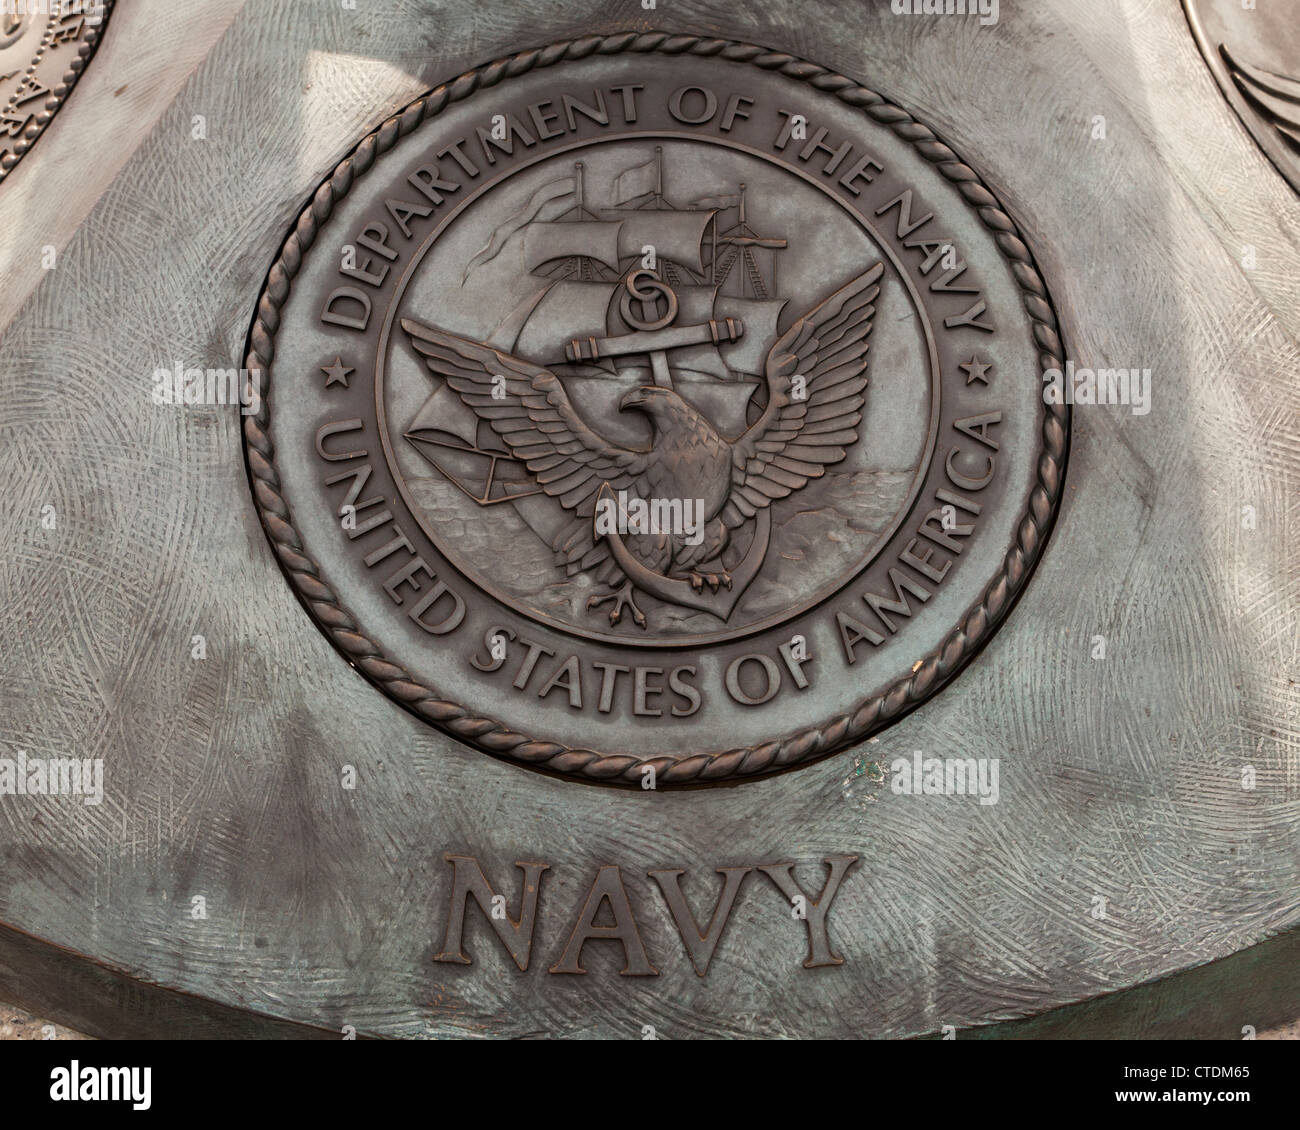 US Navy seal Banque D'Images